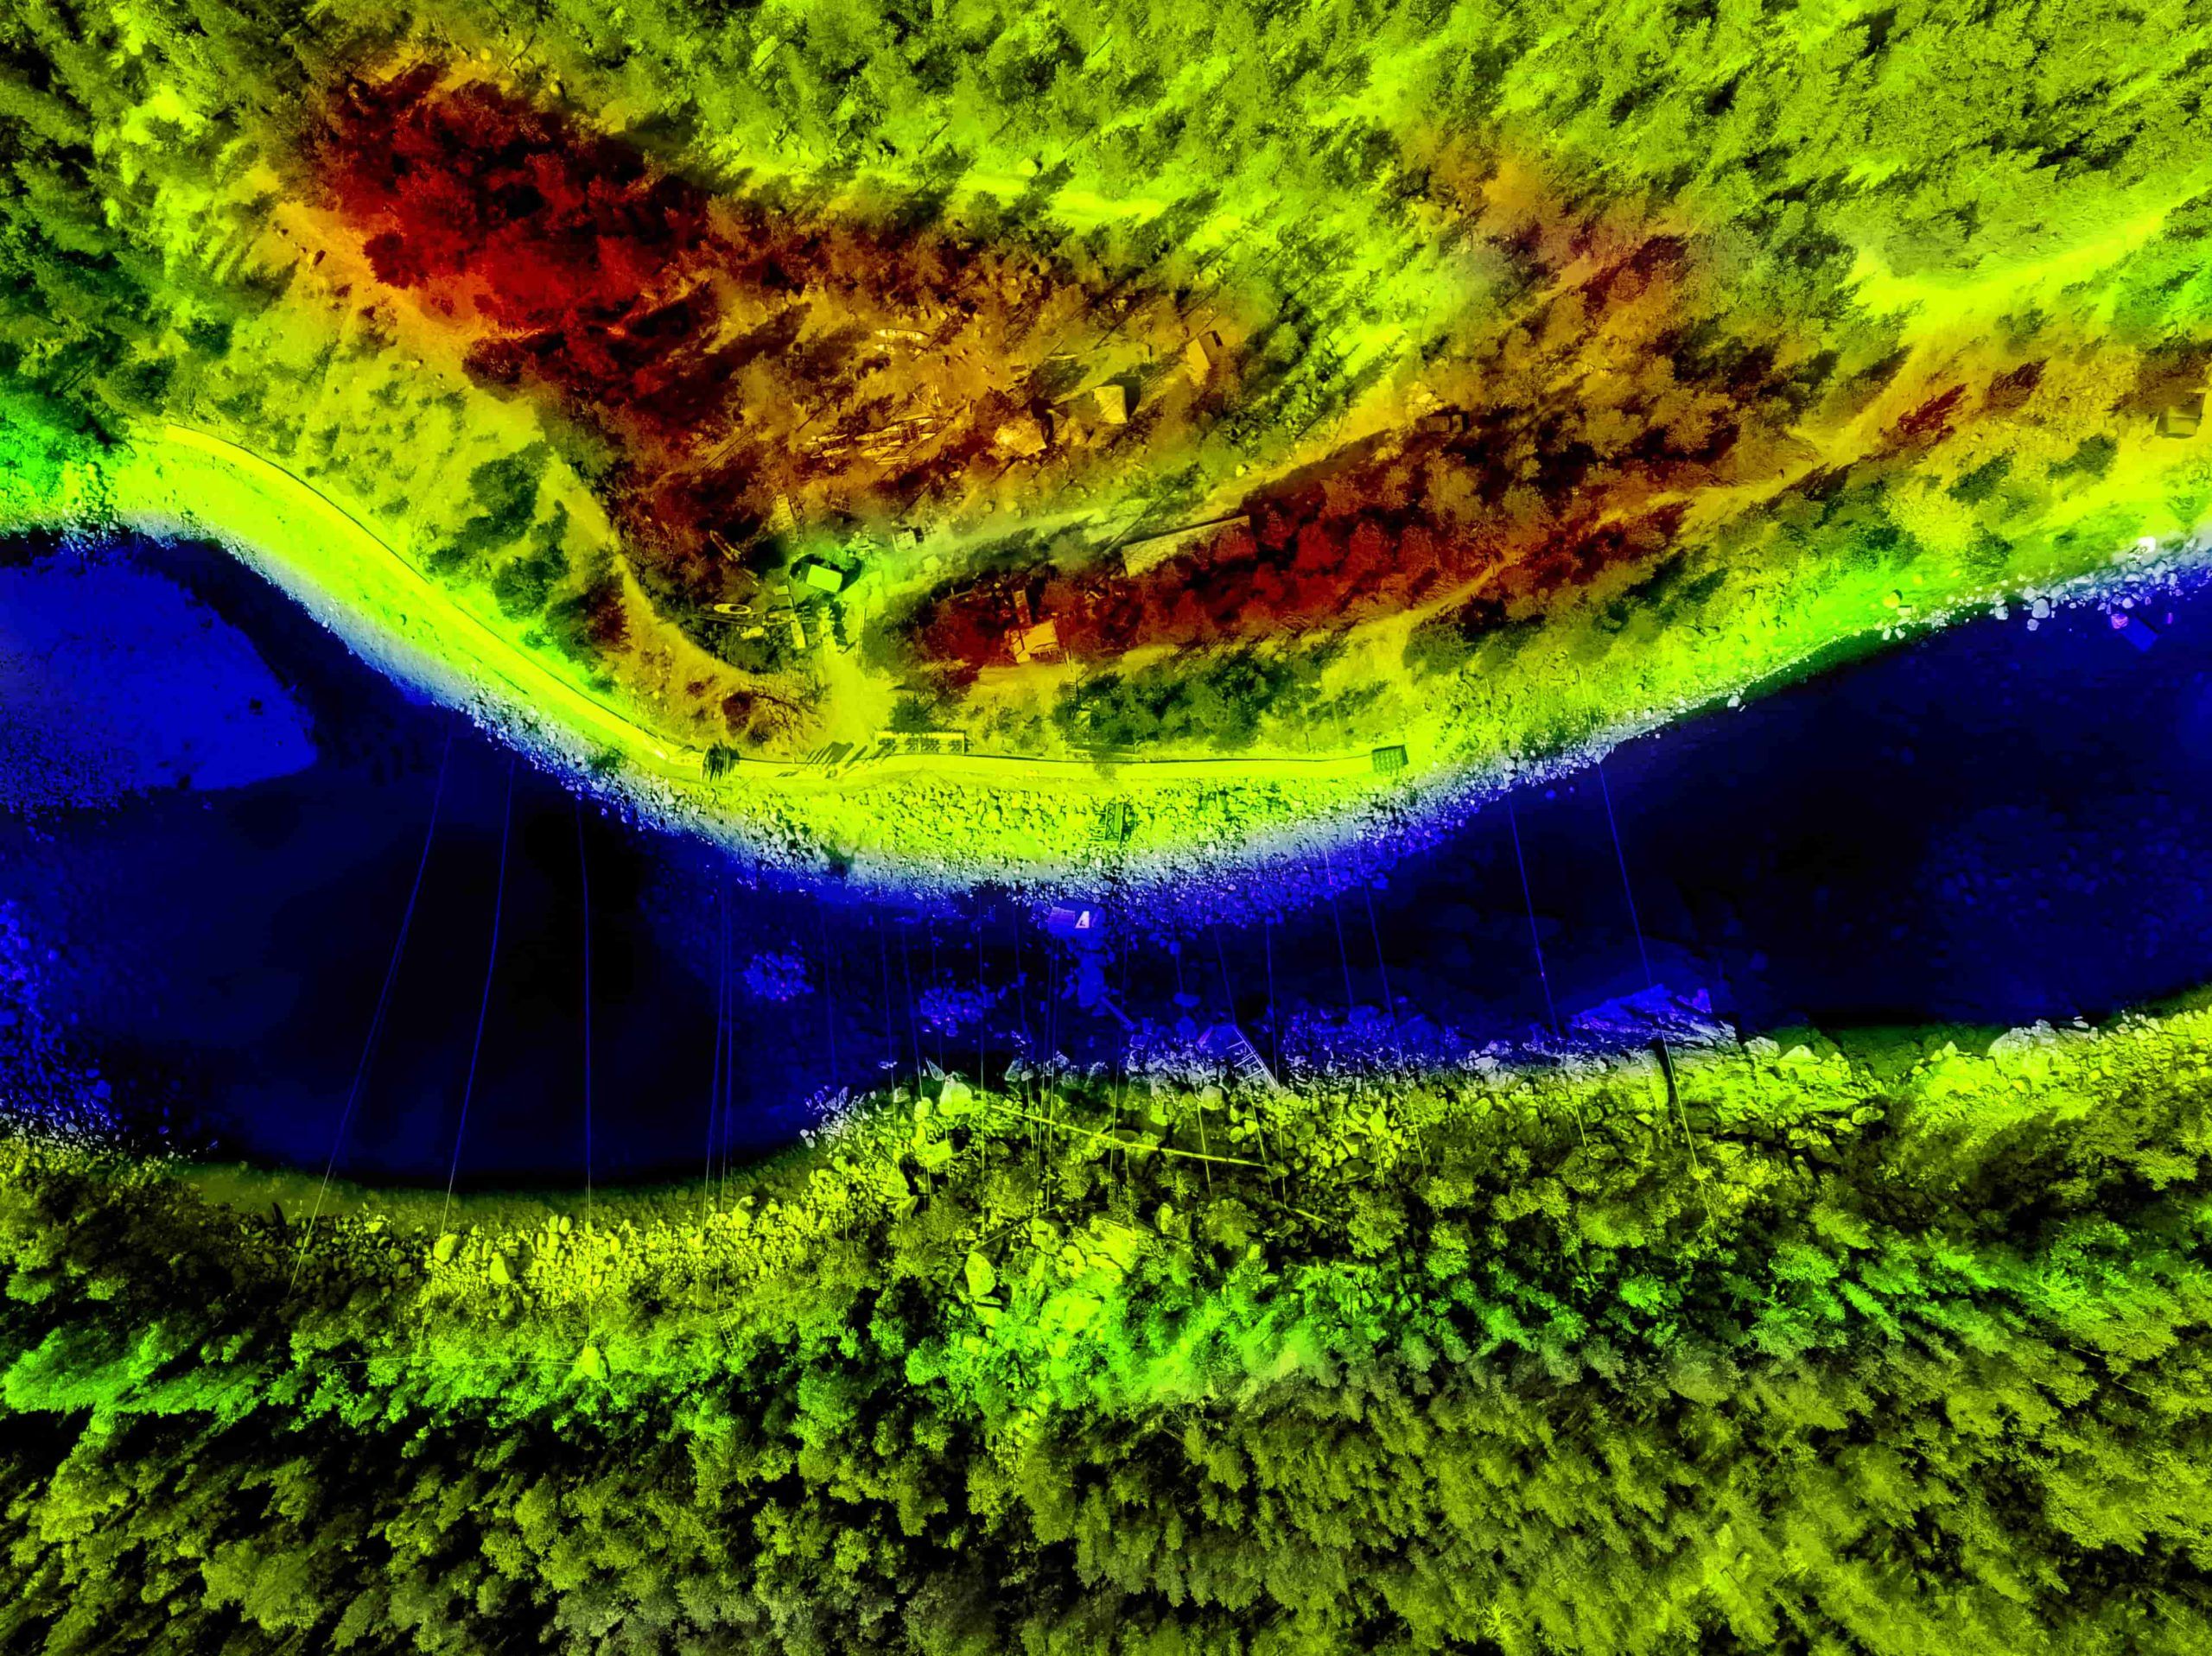 LiDAR topographic map of river and forest